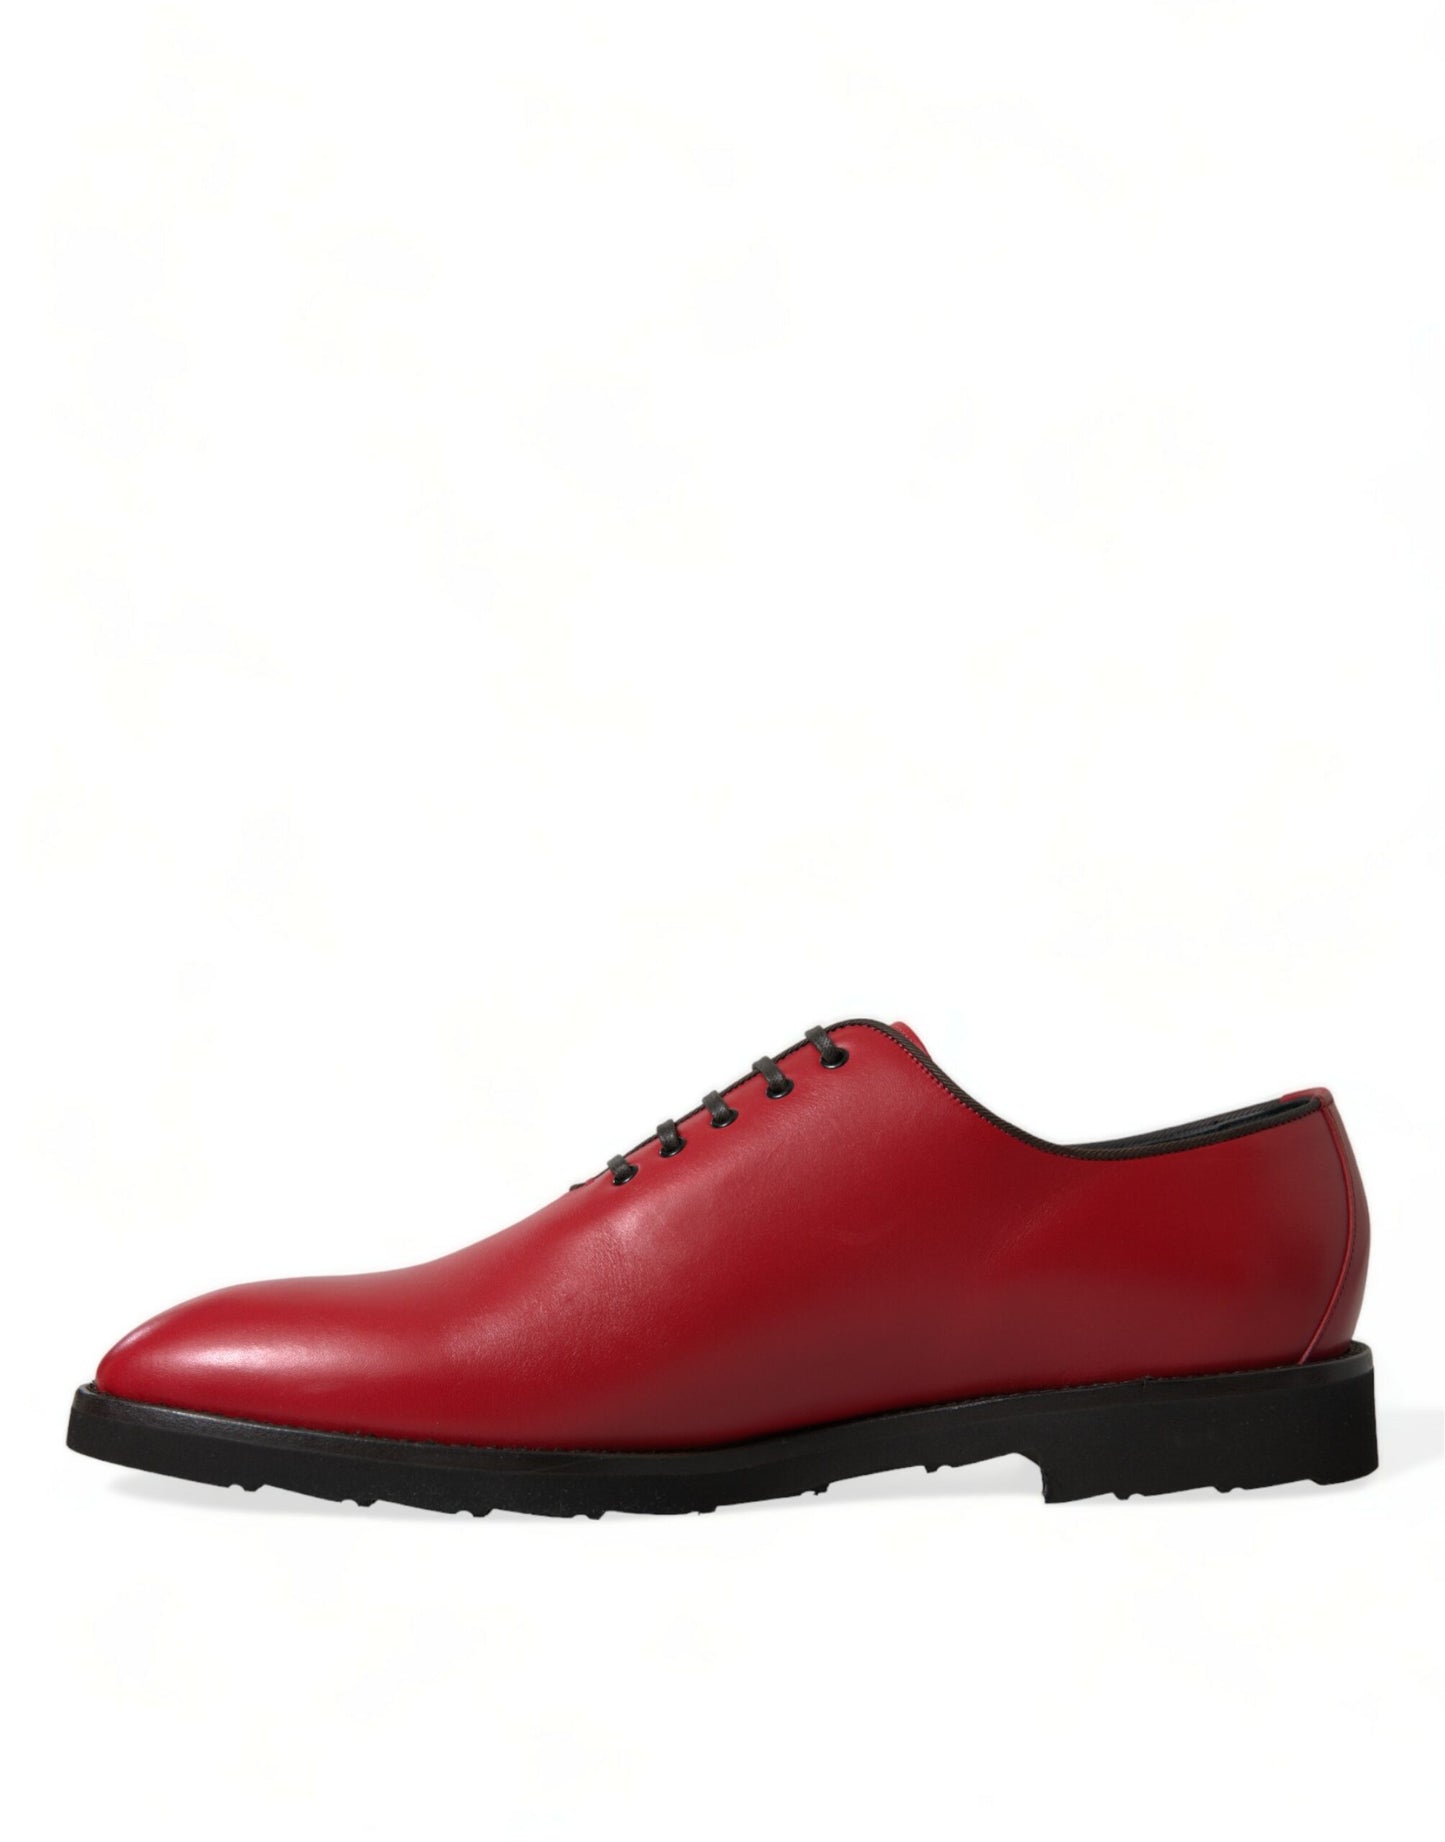 Dolce & Gabbana Elegant Red Leather Oxford Dress Shoes